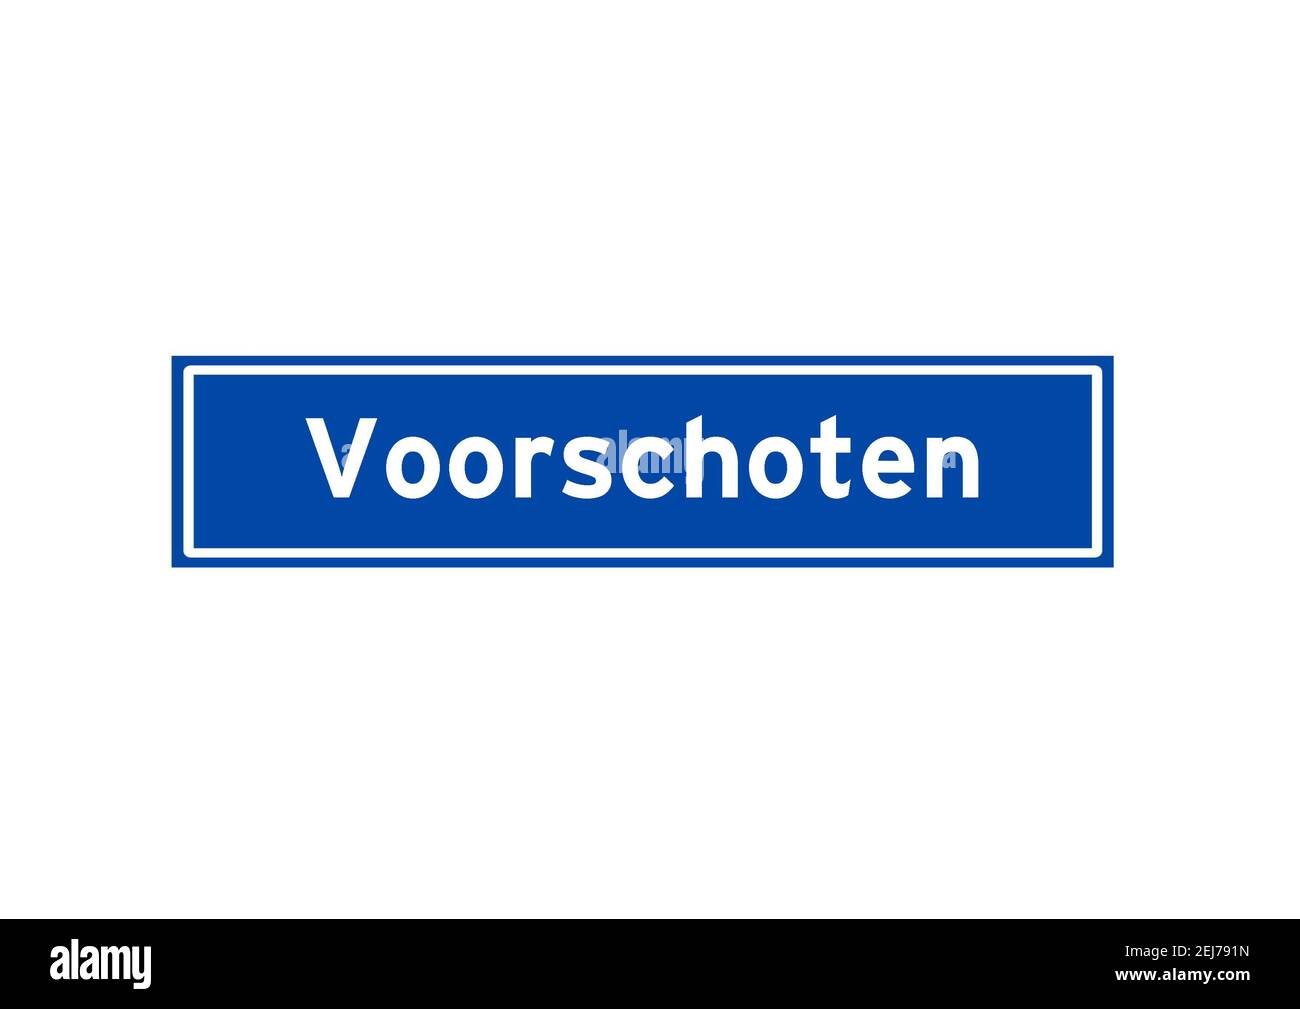 Voorschoten isolated Dutch place name sign. City sign from the Netherlands. Stock Photo